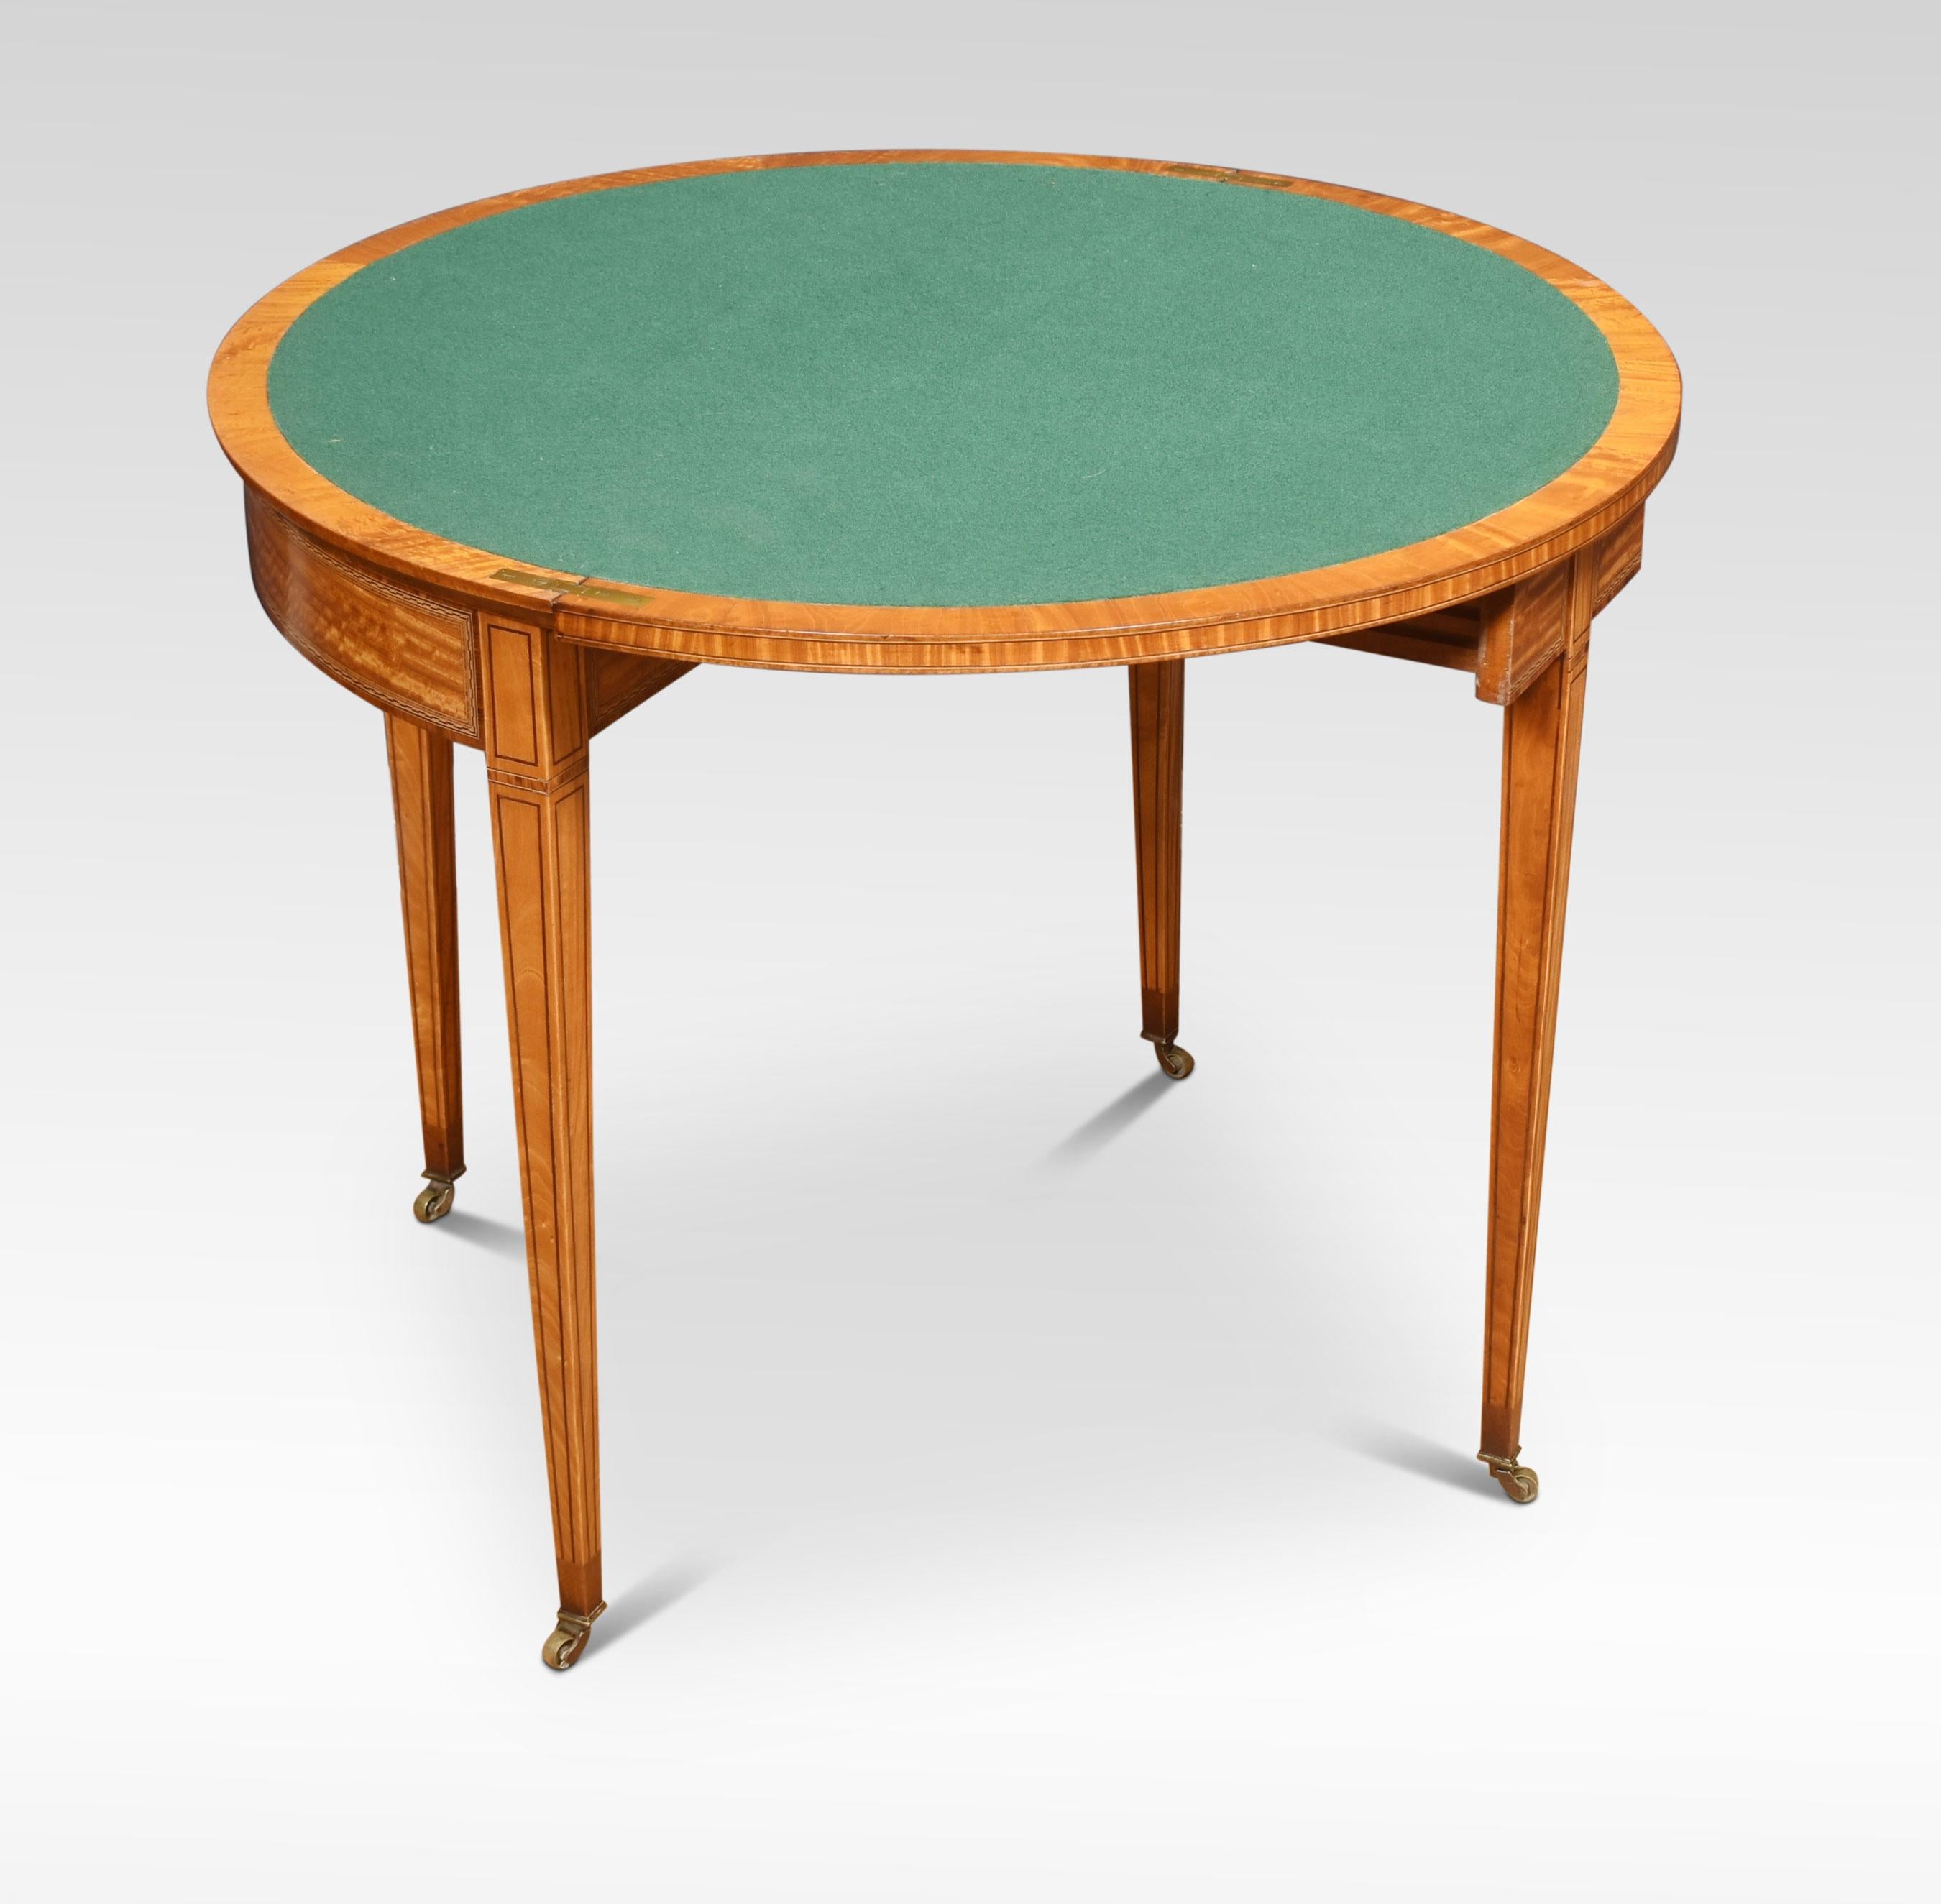 Demilune card table the satinwood top with banding. To the fold-over top opening to reveal the inset green baize card table. The molded frieze raised up on tapering legs and spade feet. Terminating in brass casters.
Dimensions
Height 30